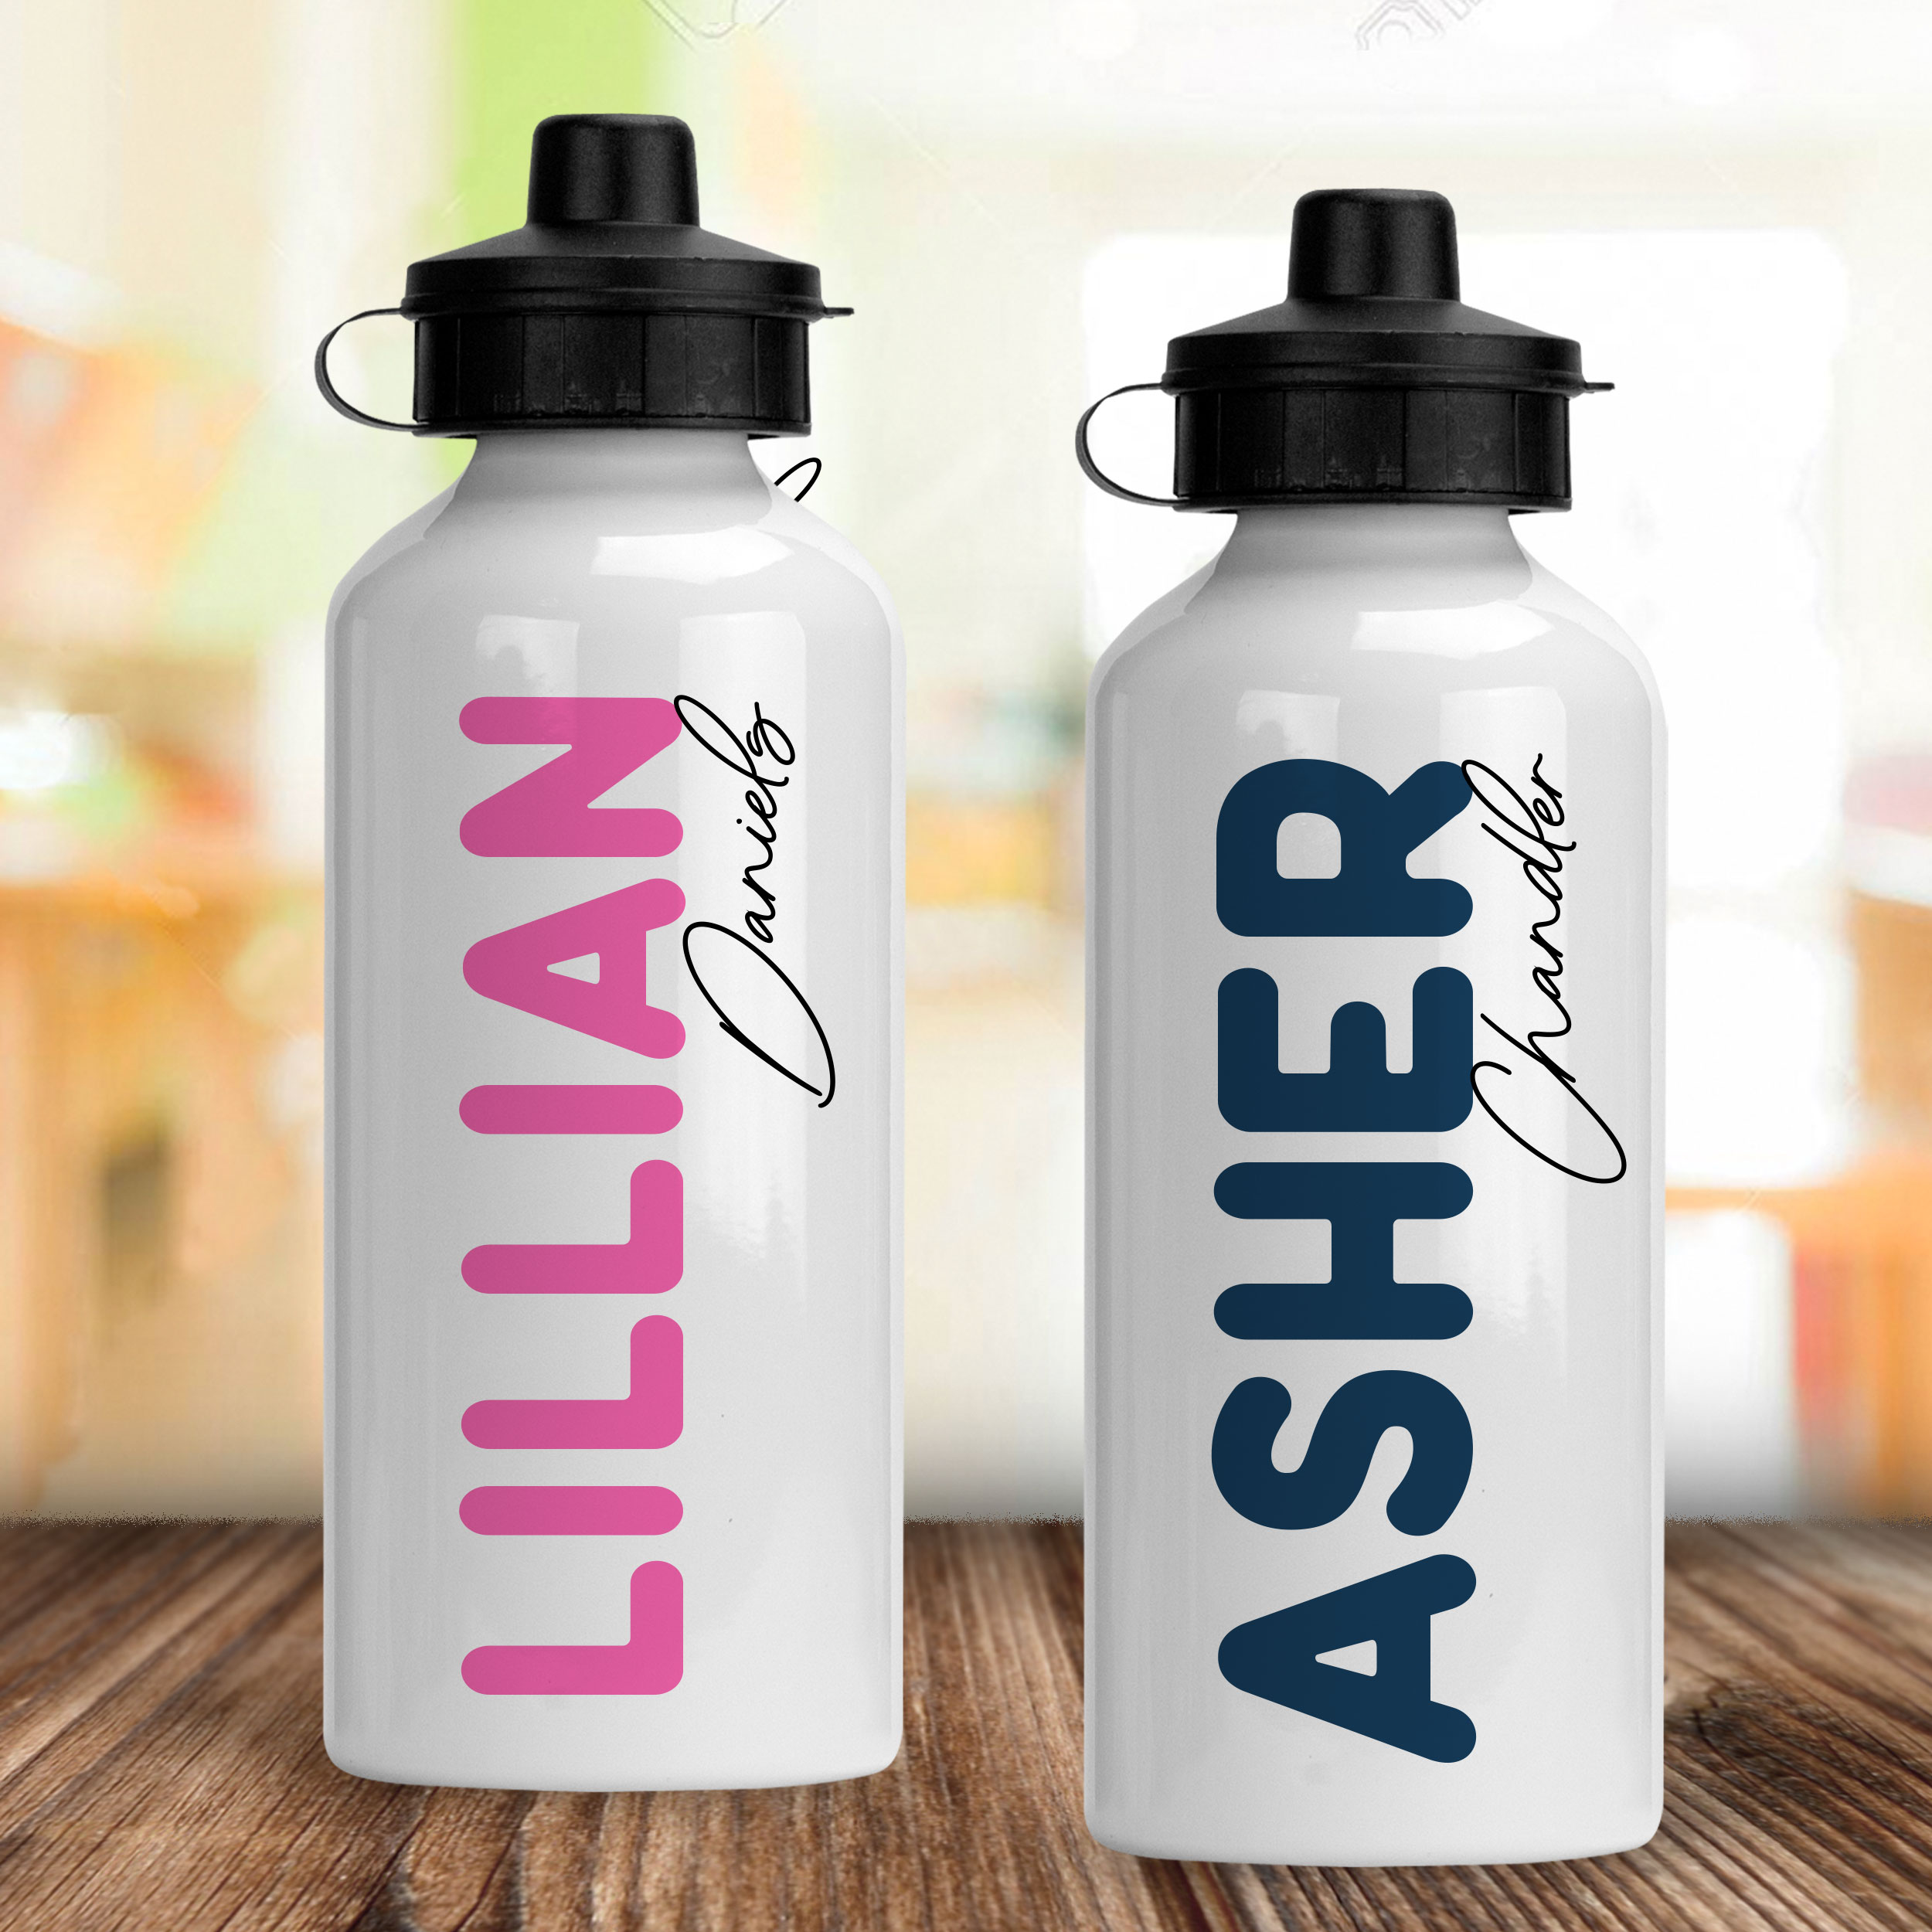 Dad Water Bottle, Fathers Day Gift, Dad's Water Bottle, Gym Bottle,  Personalised Aluminium Water Bottle 